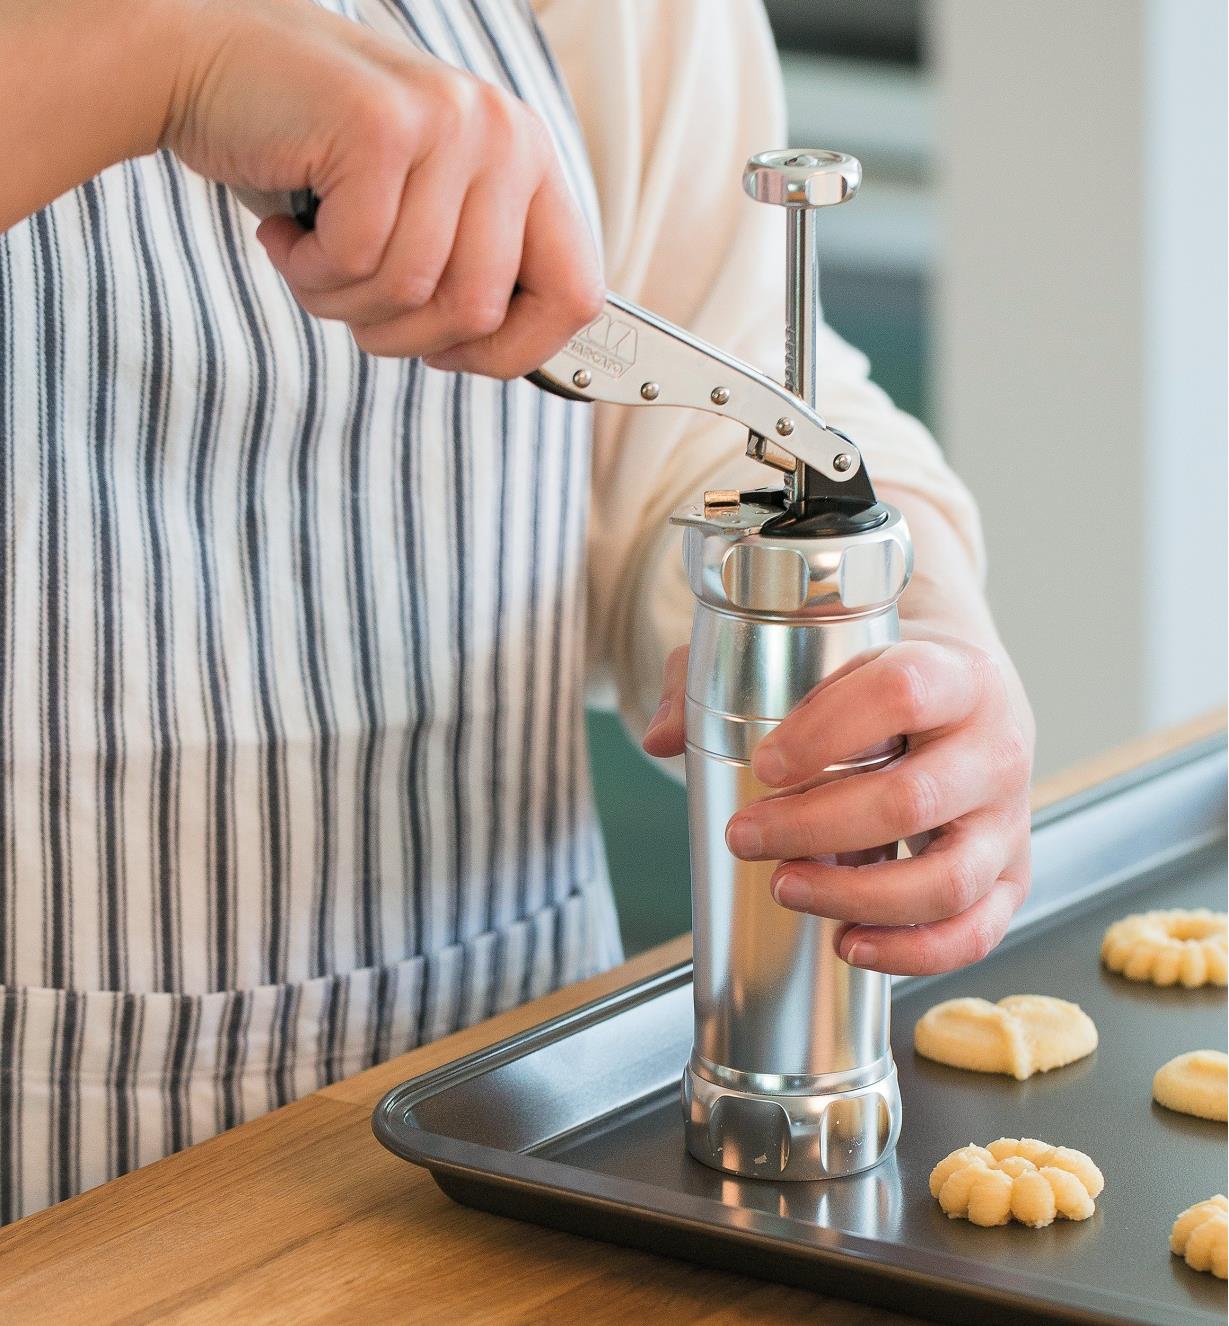 Pressing cookies into a baking tray using the Marcato cookie press